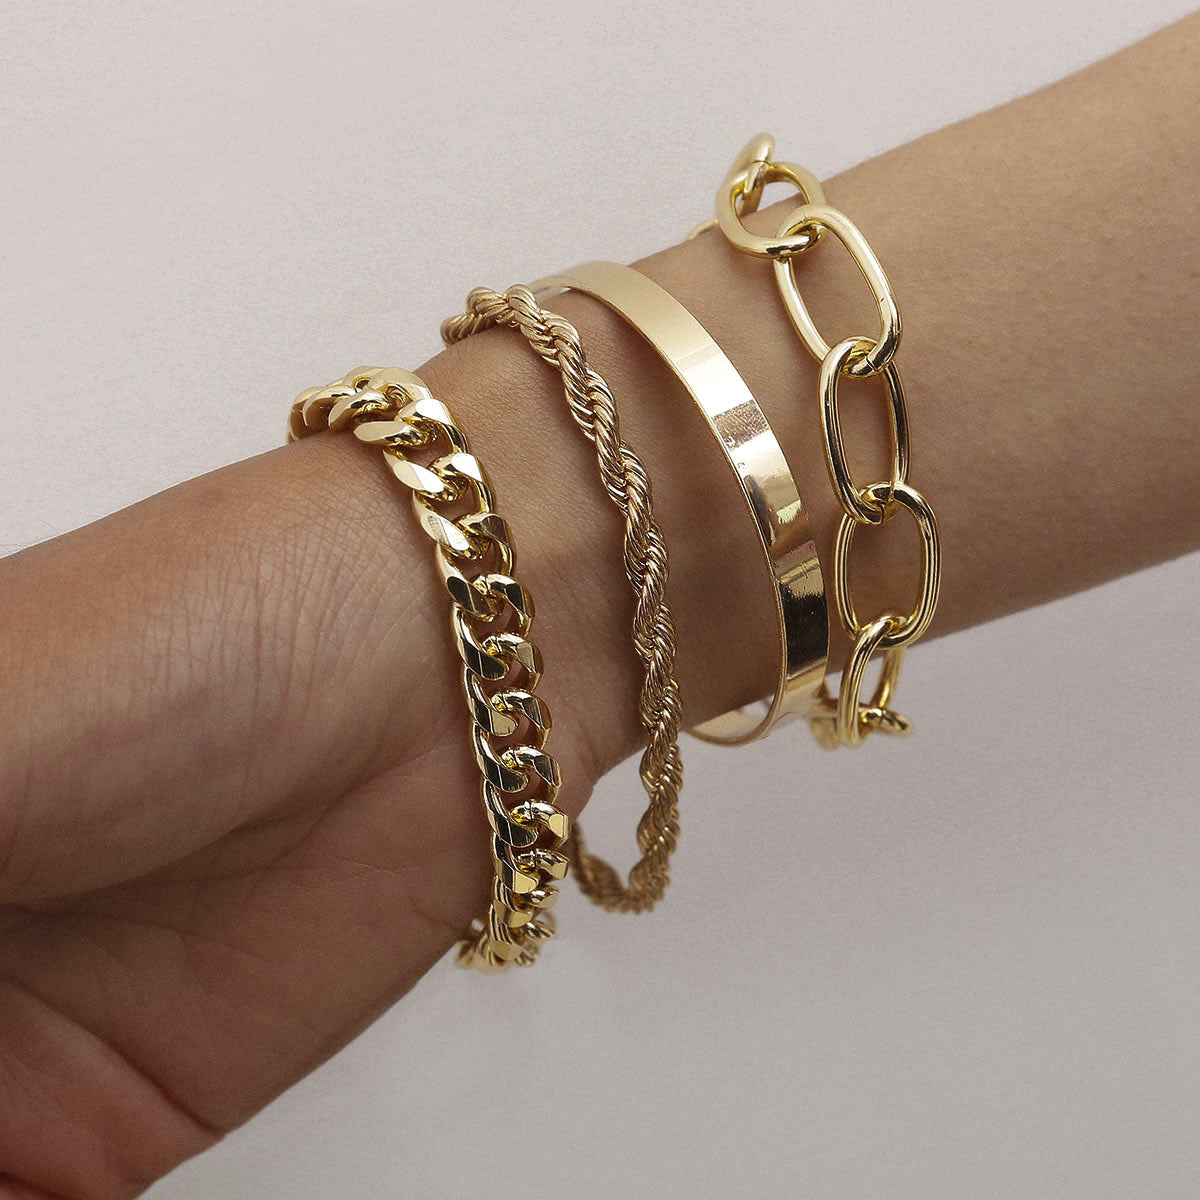 Twist Chain Exaggerated O-shaped Chain Cover Bracelet Thread